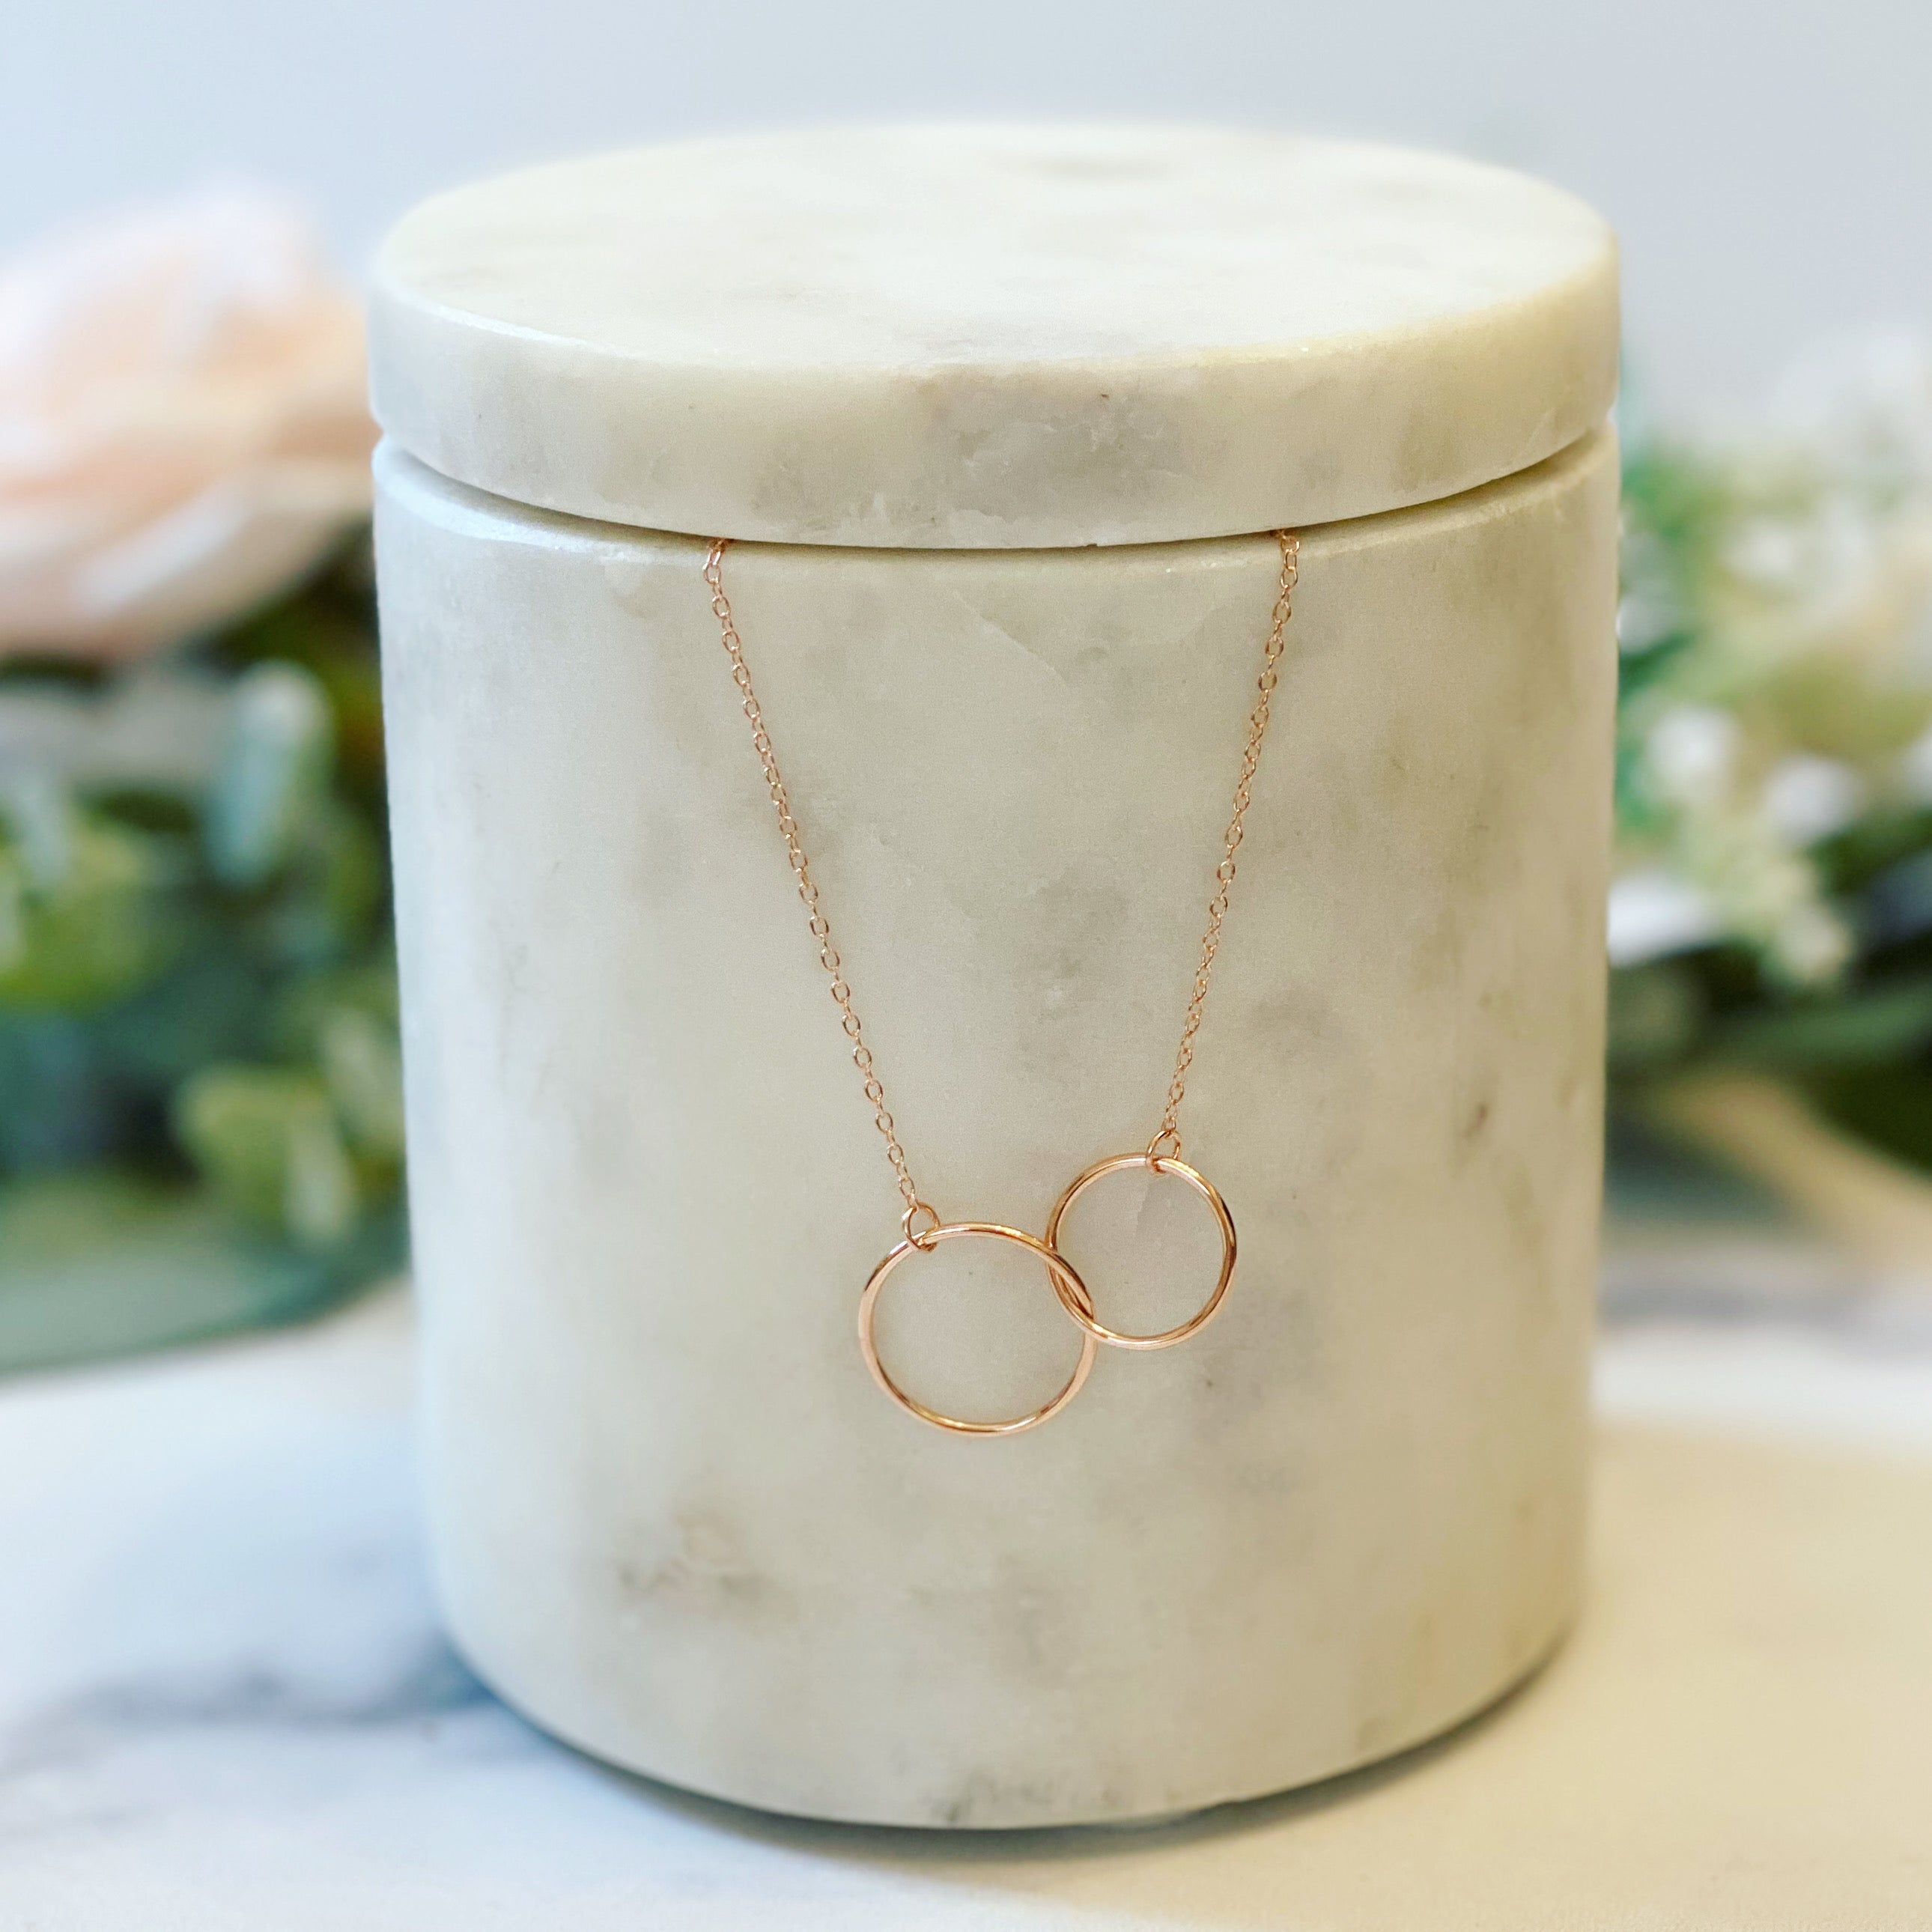 Mother Daughter Infinity Necklace, Sterling Silver Mother Daughter Duo  Necklace, Symbology Pendant Charm Necklace, Mothers Day Gift for Her - Etsy